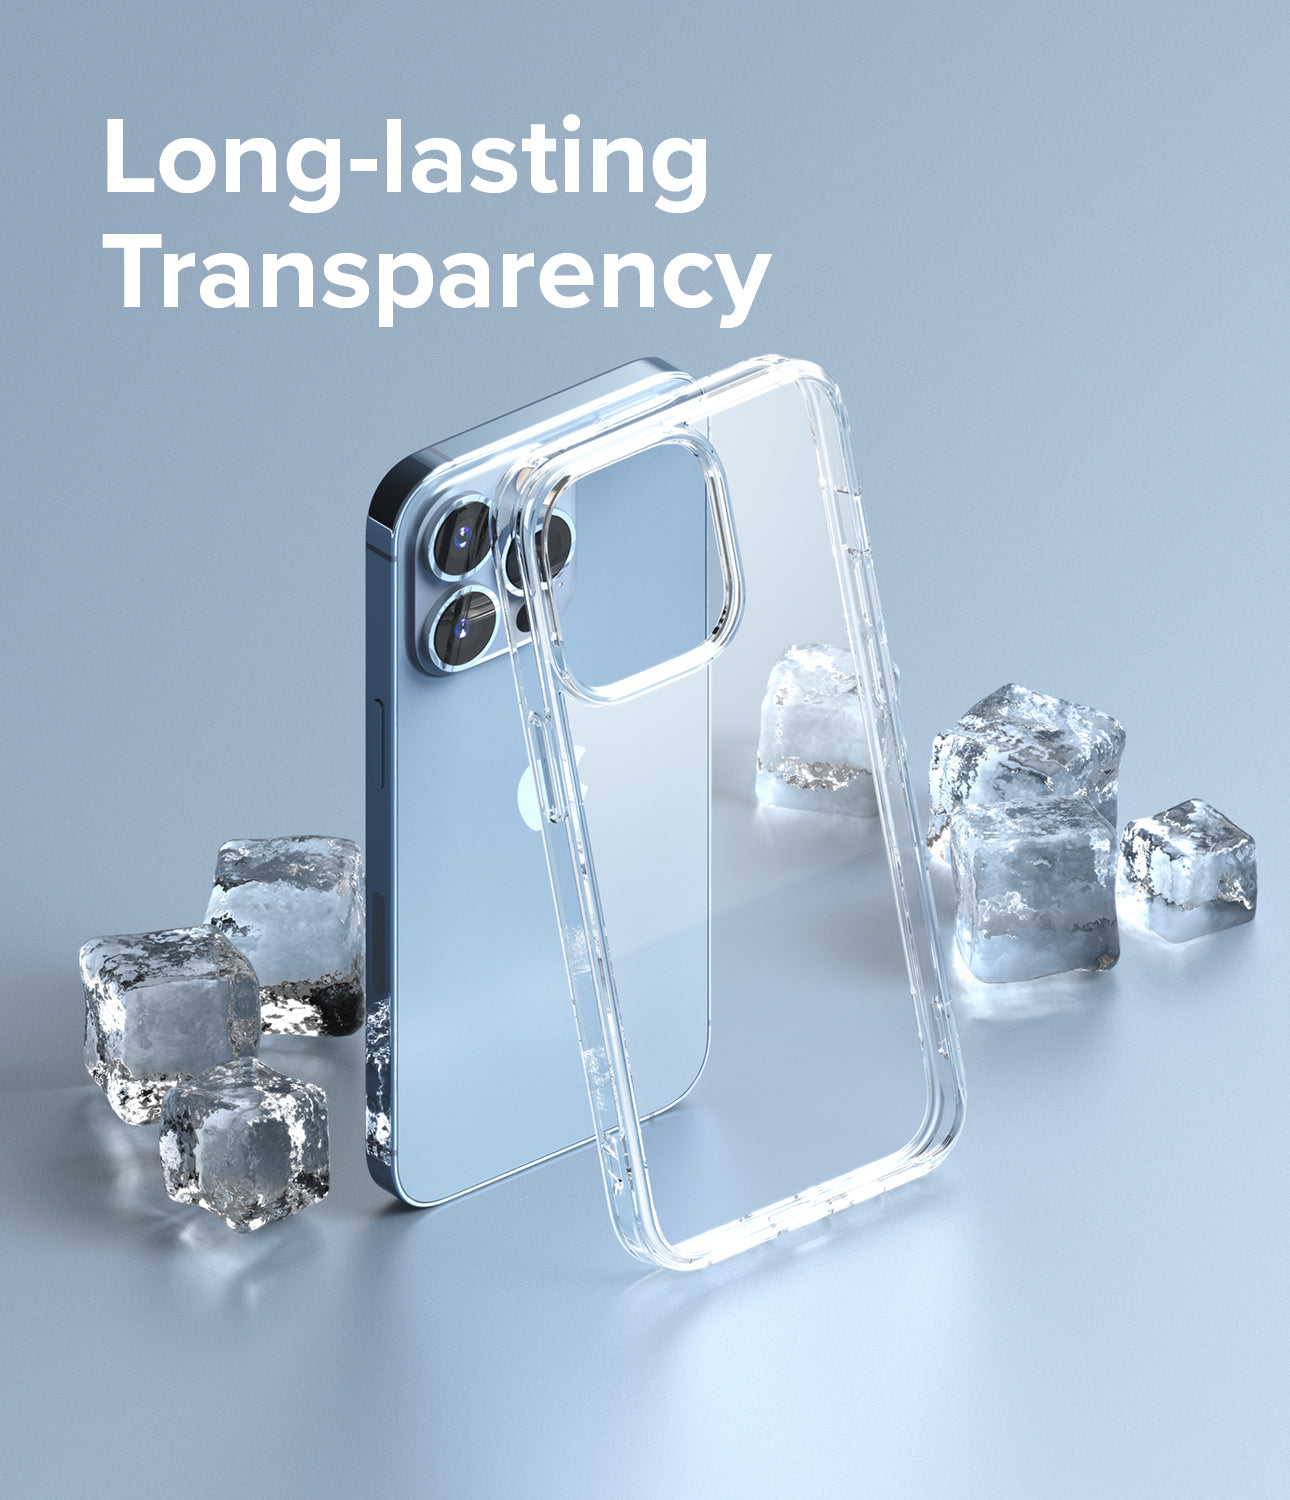 iPhone 13 Pro Case | Fusion - Long-lasting Transparency